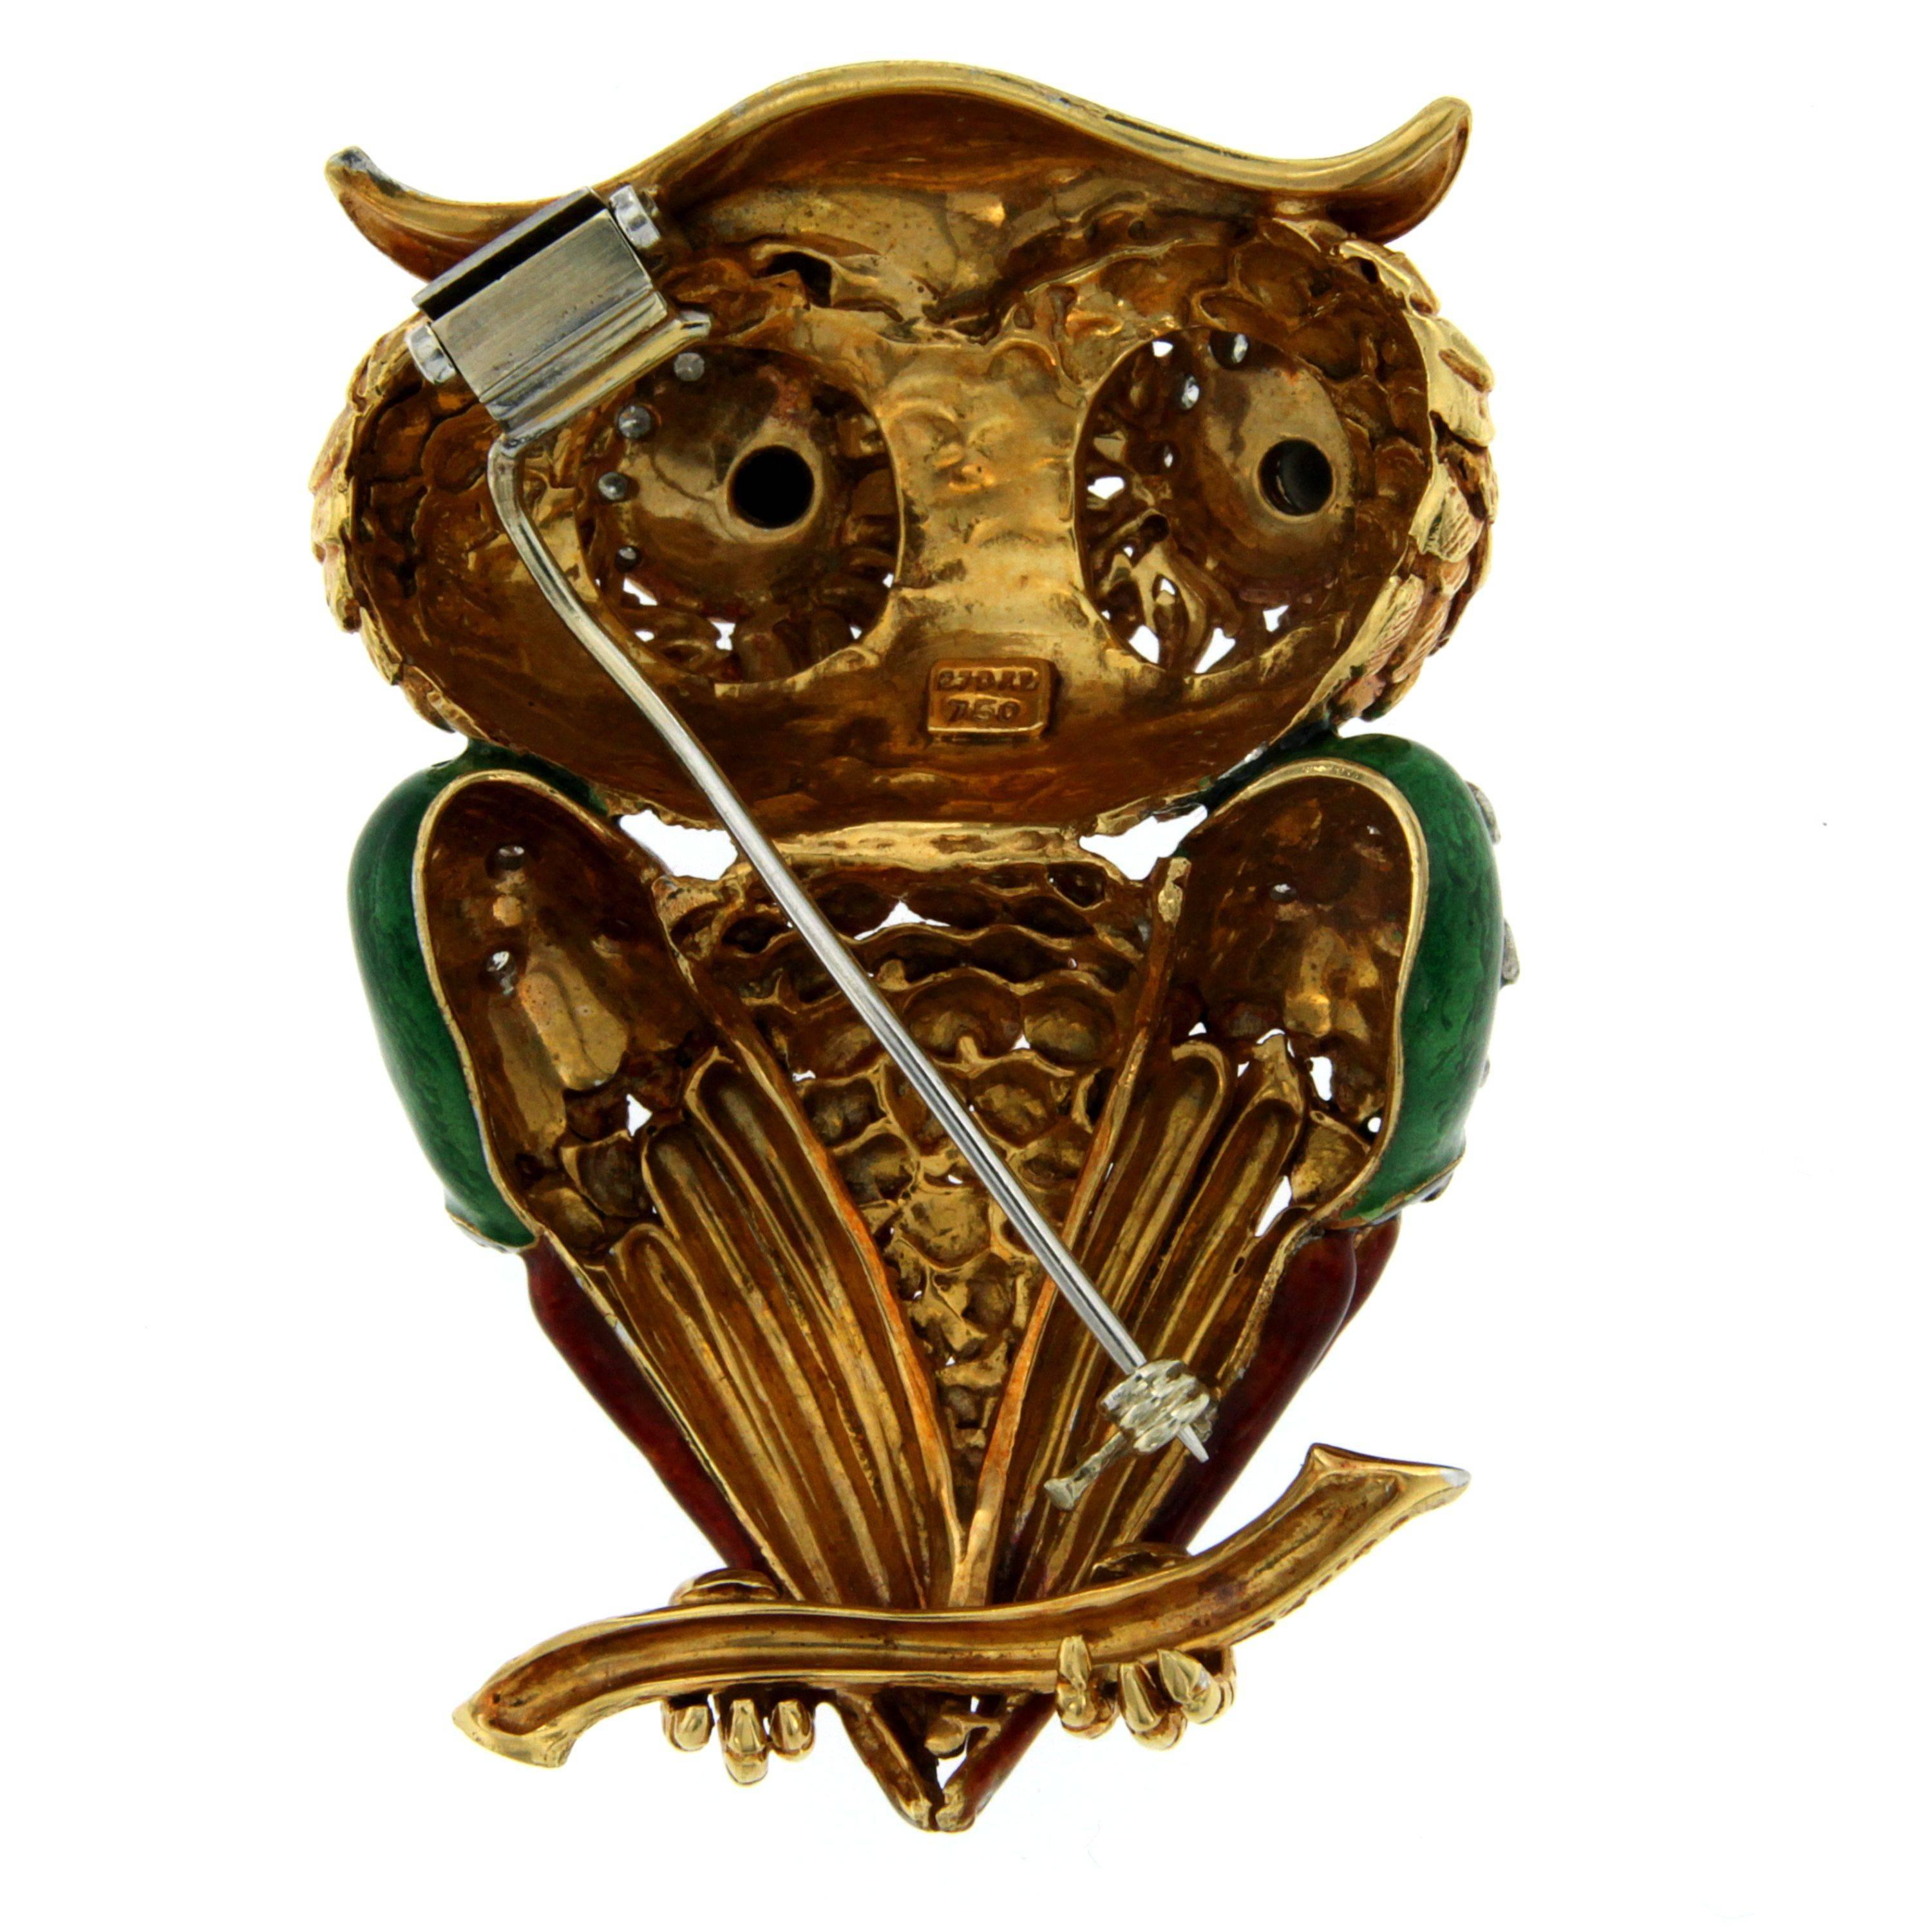 For sale this Beautiful and Pleasant brooch from 1980' origin Italy.
It is made of solid 18k yellow Gold, marked 750 and 279AL (Valenza Italy) about the goldsmith
The brooch represents a nice Owl, animal has always considered Lucky, and it is very